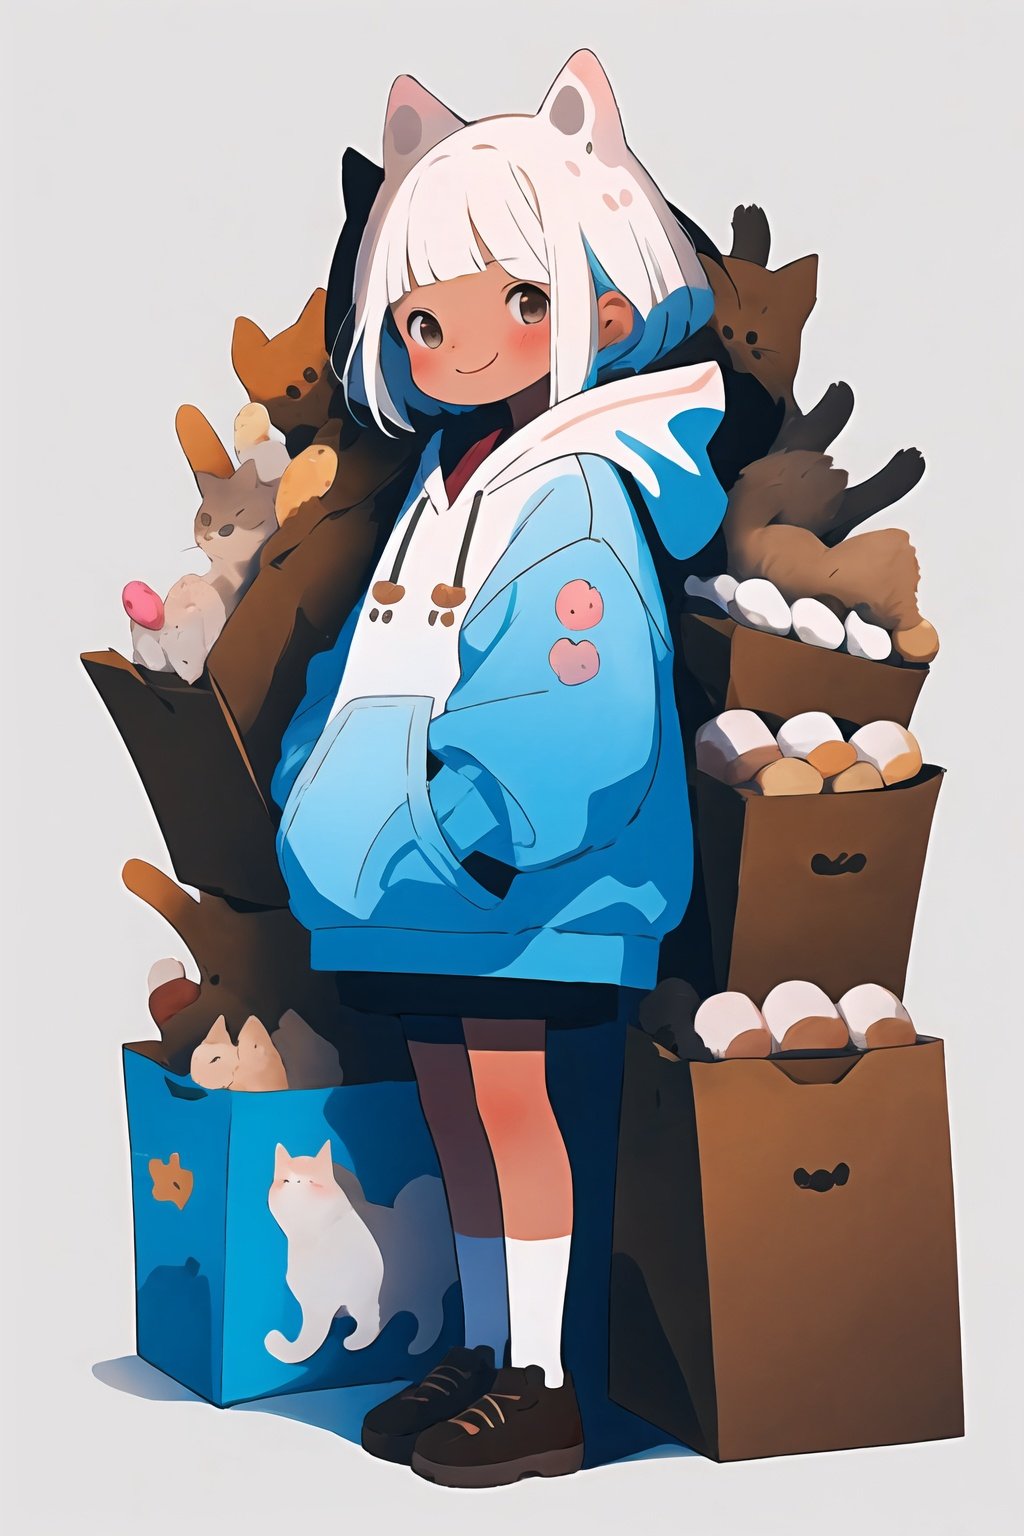 style of Enki Bilal, adorable, happy, a girl, white hair, puffy hoody, donuts, many cats, full body, pastel colors, simple white background, in donuts, Illustration, cover art, japan, blur, shiny,minimalistic,simplecats